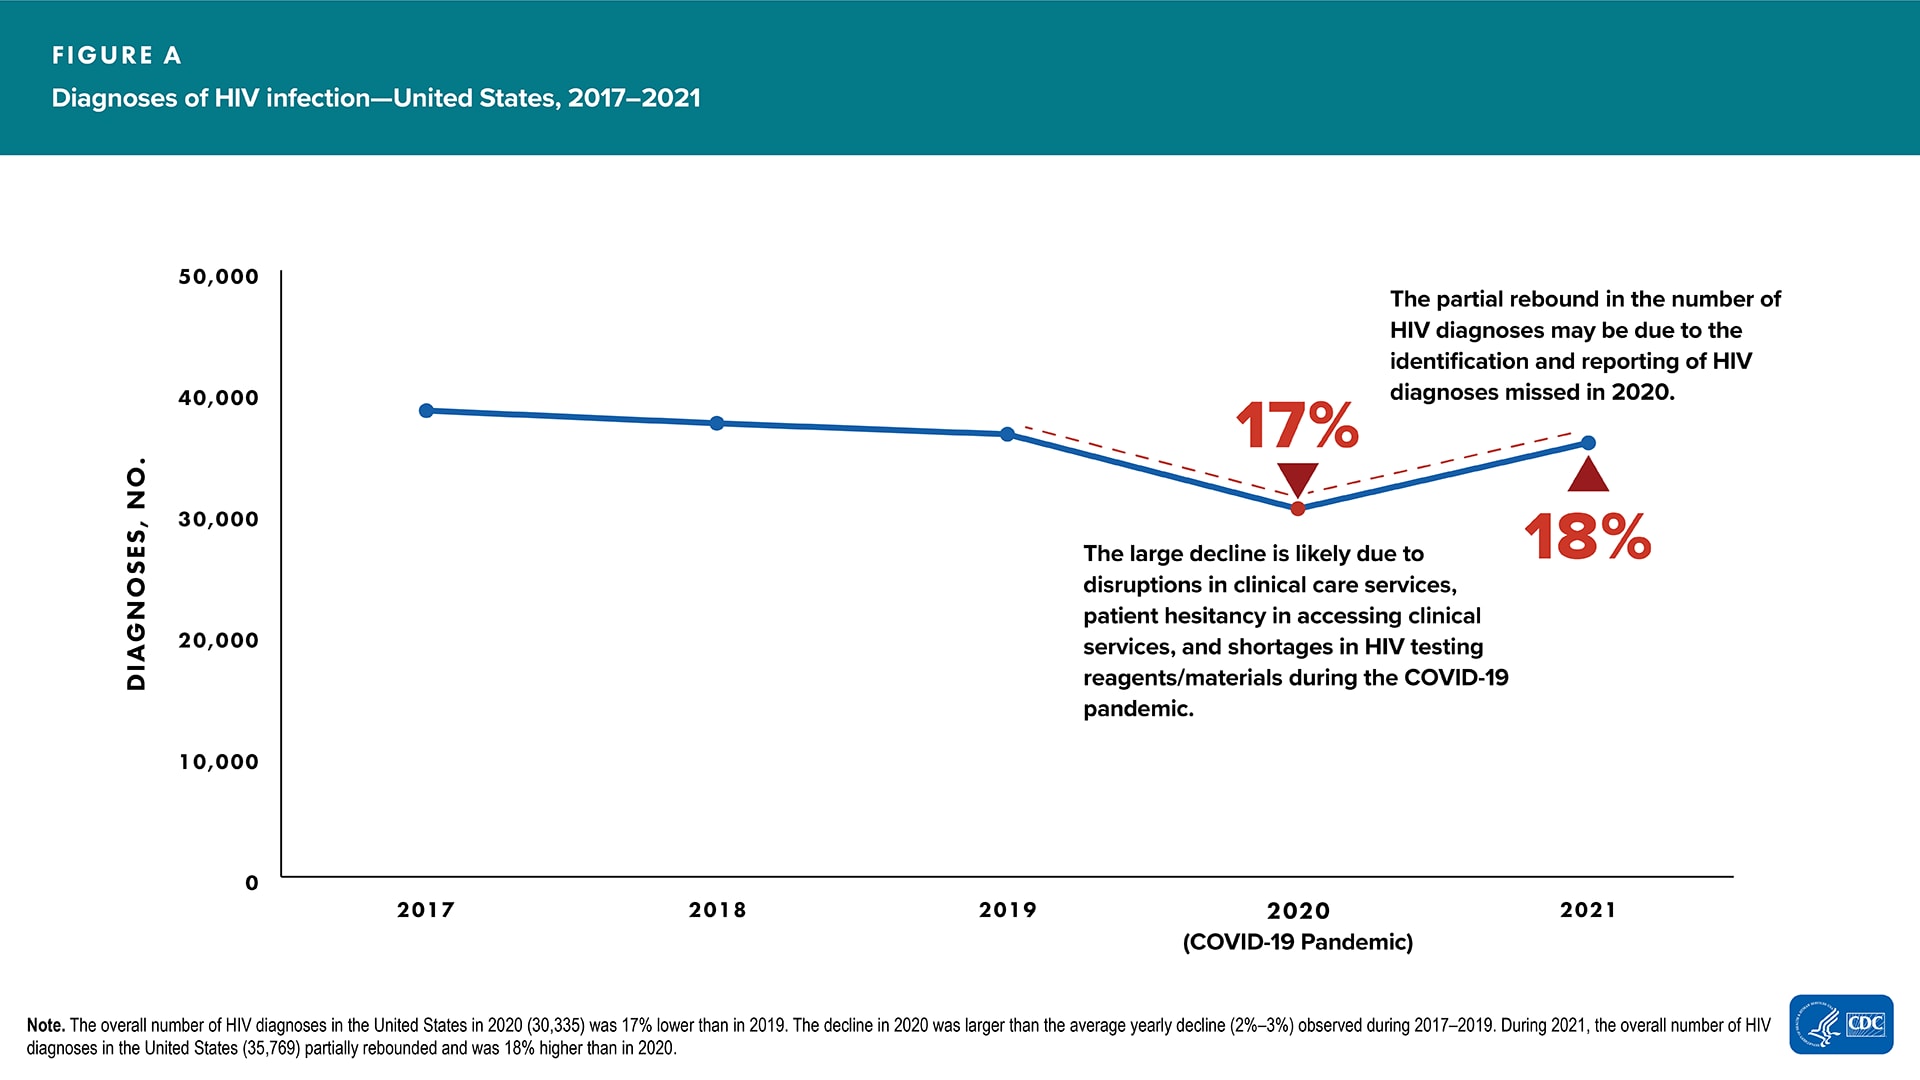 The annual number of HIV diagnoses in 2020 was 17% lower than in 2019, likely due to disruptions in clinical care services, patient hesitancy in accessing clinical services, and shortages in HIV testing reagents/materials during the COVID-19 pandemic. During 2021, the overall number of HIV diagnoses rebounded and was 18% higher than in 2020; the partial rebound in the number of HIV diagnoses may be due to the identification and reporting of HIV cases missed in 2020.